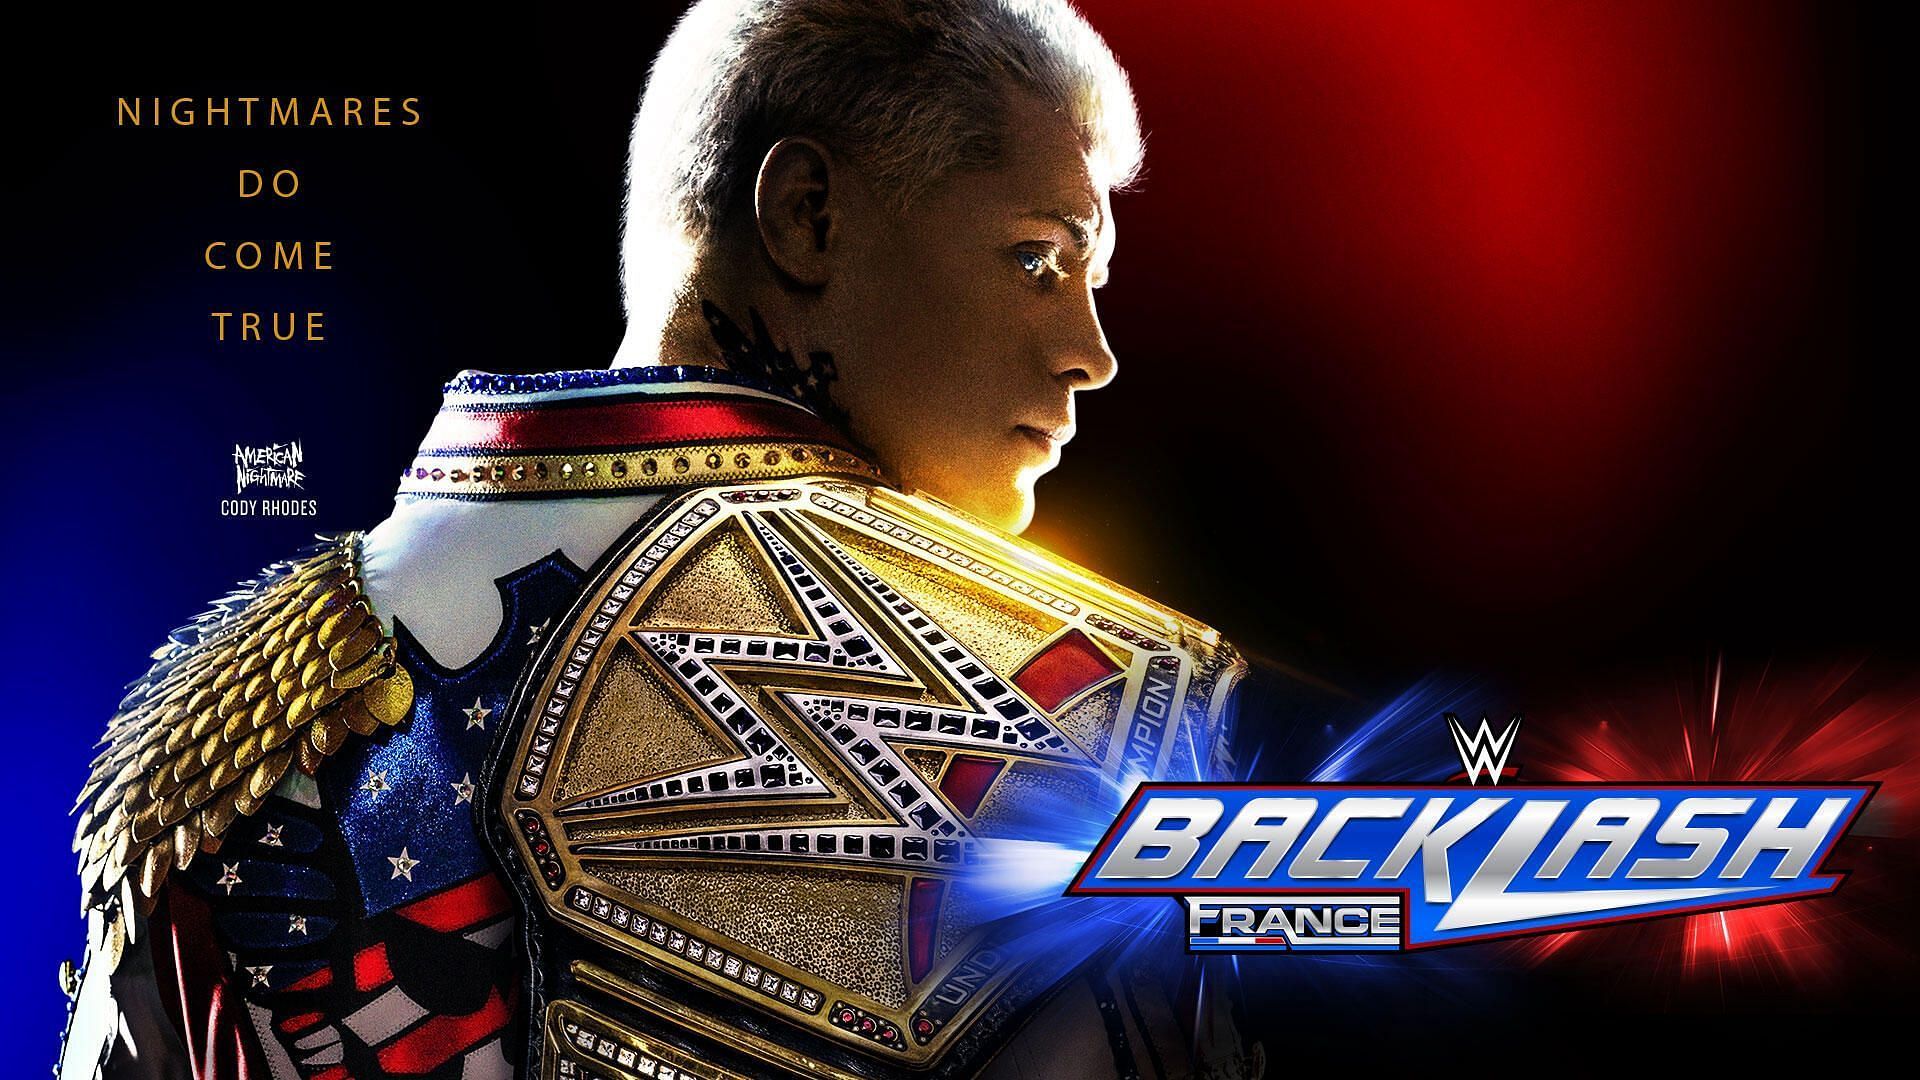 Backlash France features some fresh matches (Credit: WWE)